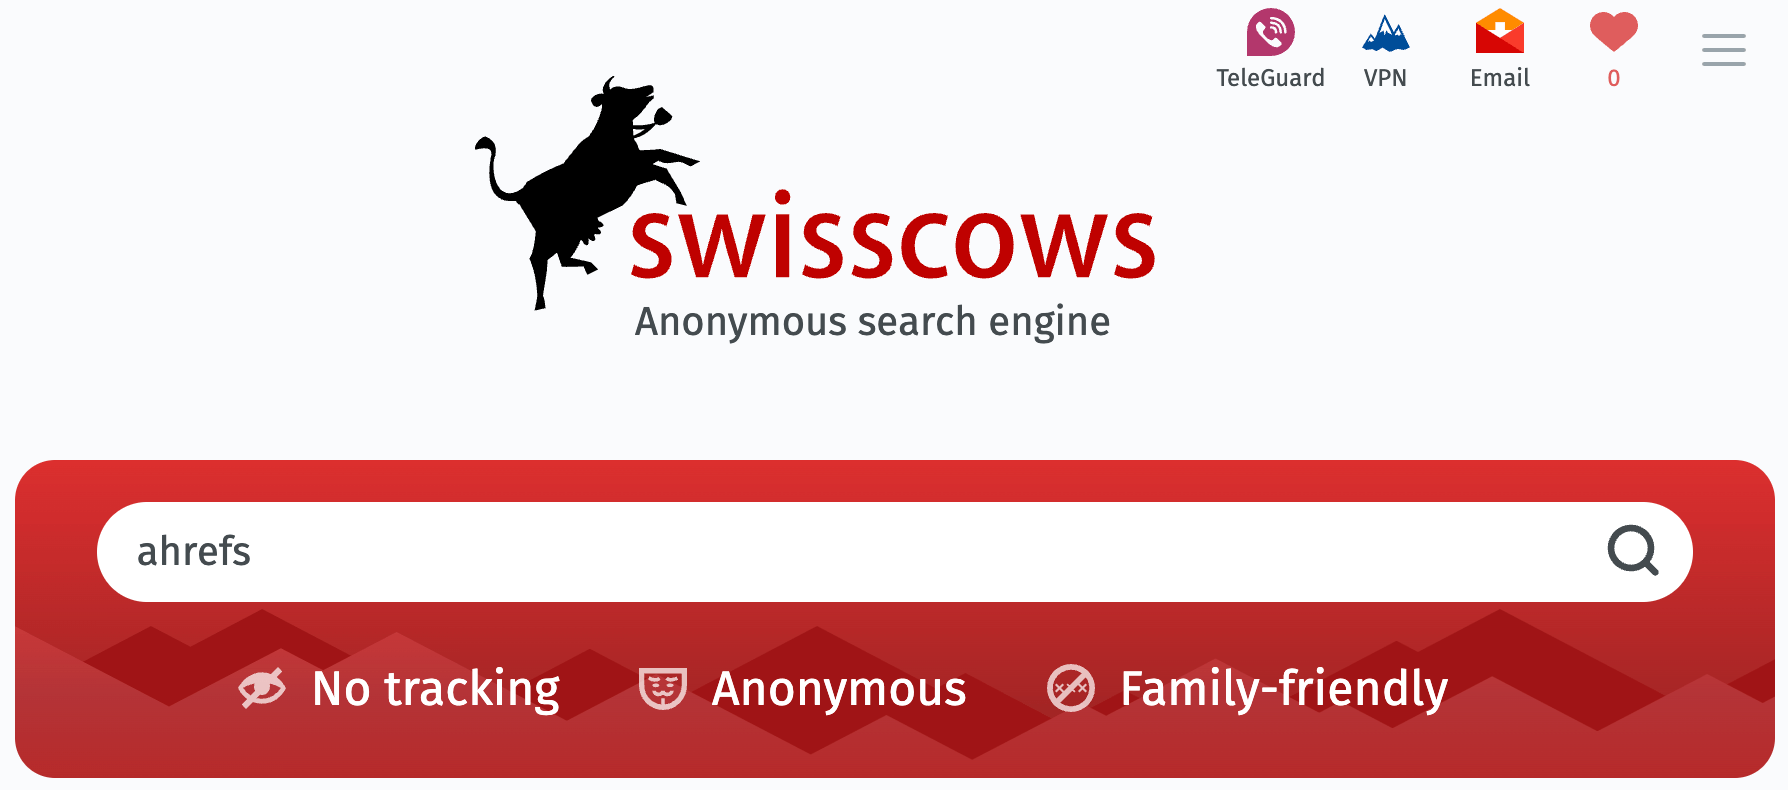 Searching "ahrefs" on Swisscows
